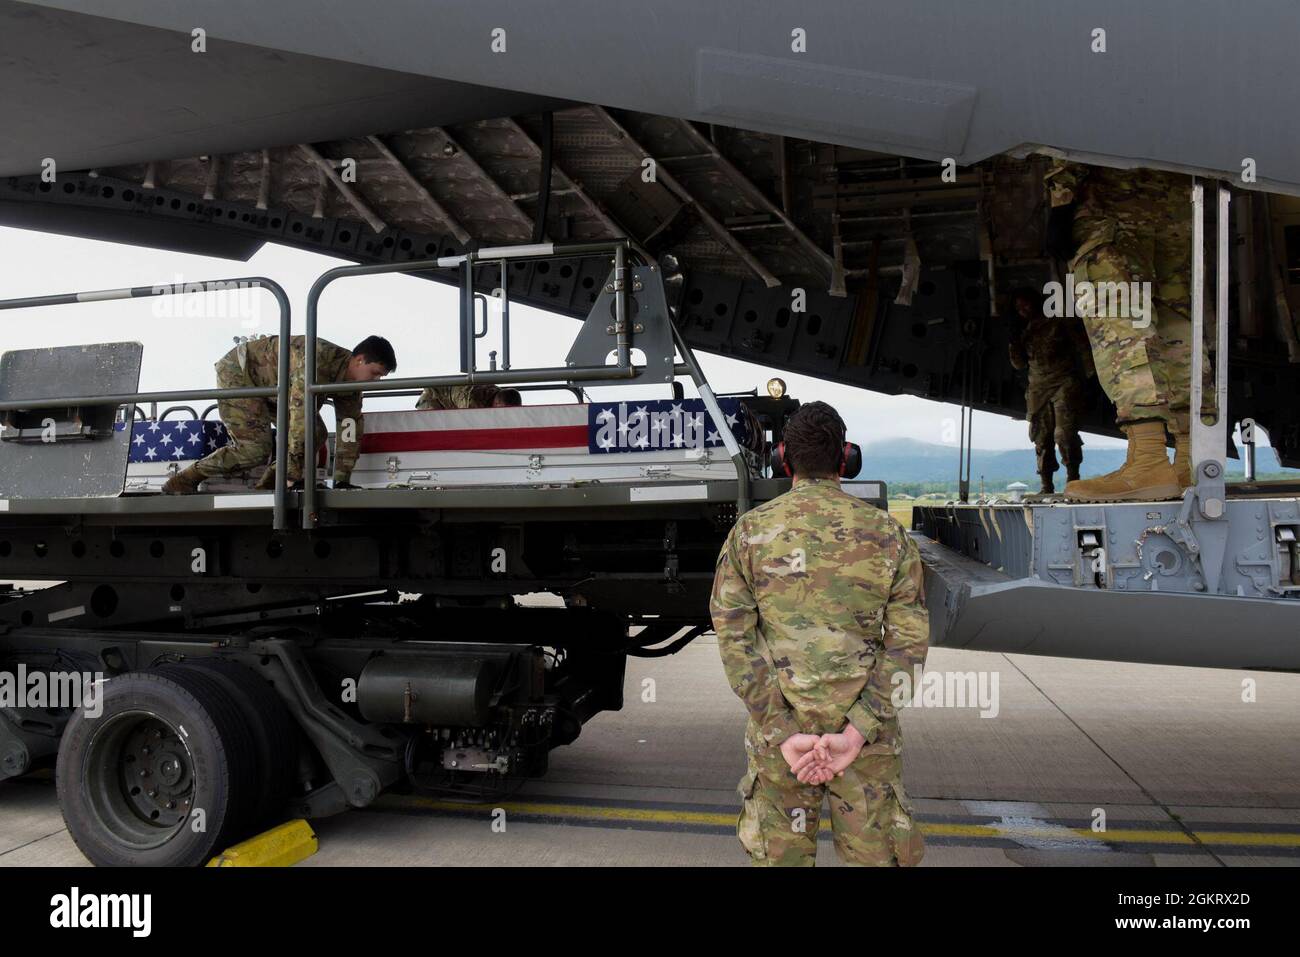 U.S. Air Force Airmen from the 721st Aerial Port Squadron load transport cases containing the possible remains of unidentified World War II soldiers onto a C-17 Globemaster III aircraft at Ramstein Air Base, Germany, June 23, 2021. The remains will undergo examination for possible identification by Defense POW/MIA Accounting Agency forensic anthropologists. The DPAA’s mission is to provide the fullest possible accounting for our missing personnel to their families and the nation. Stock Photo